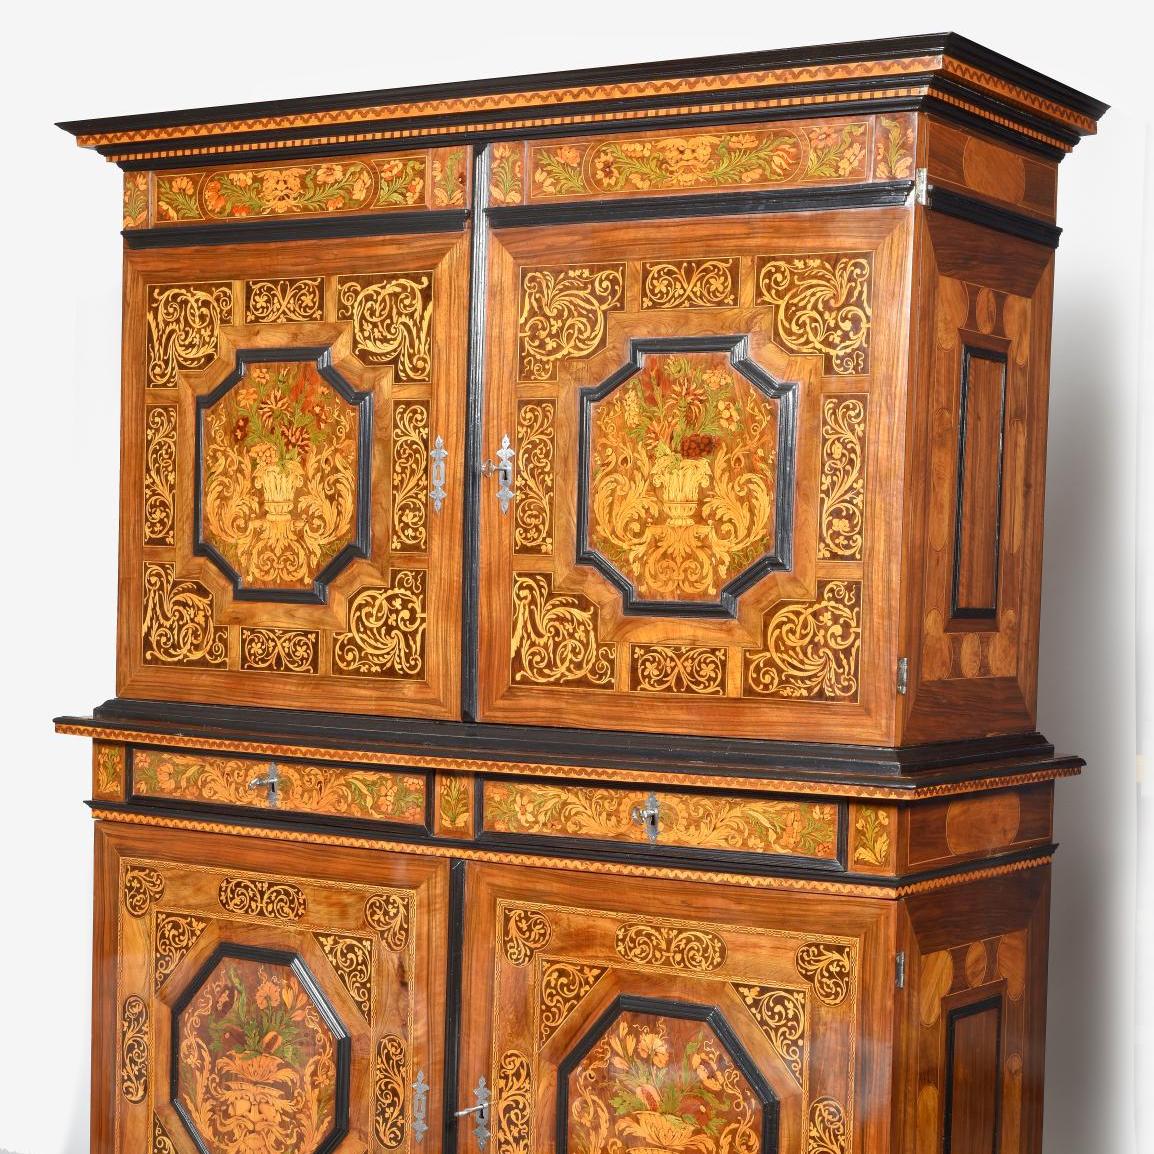 Pre-sale - A Thomas Hache Cabinet Makes its First Appearance